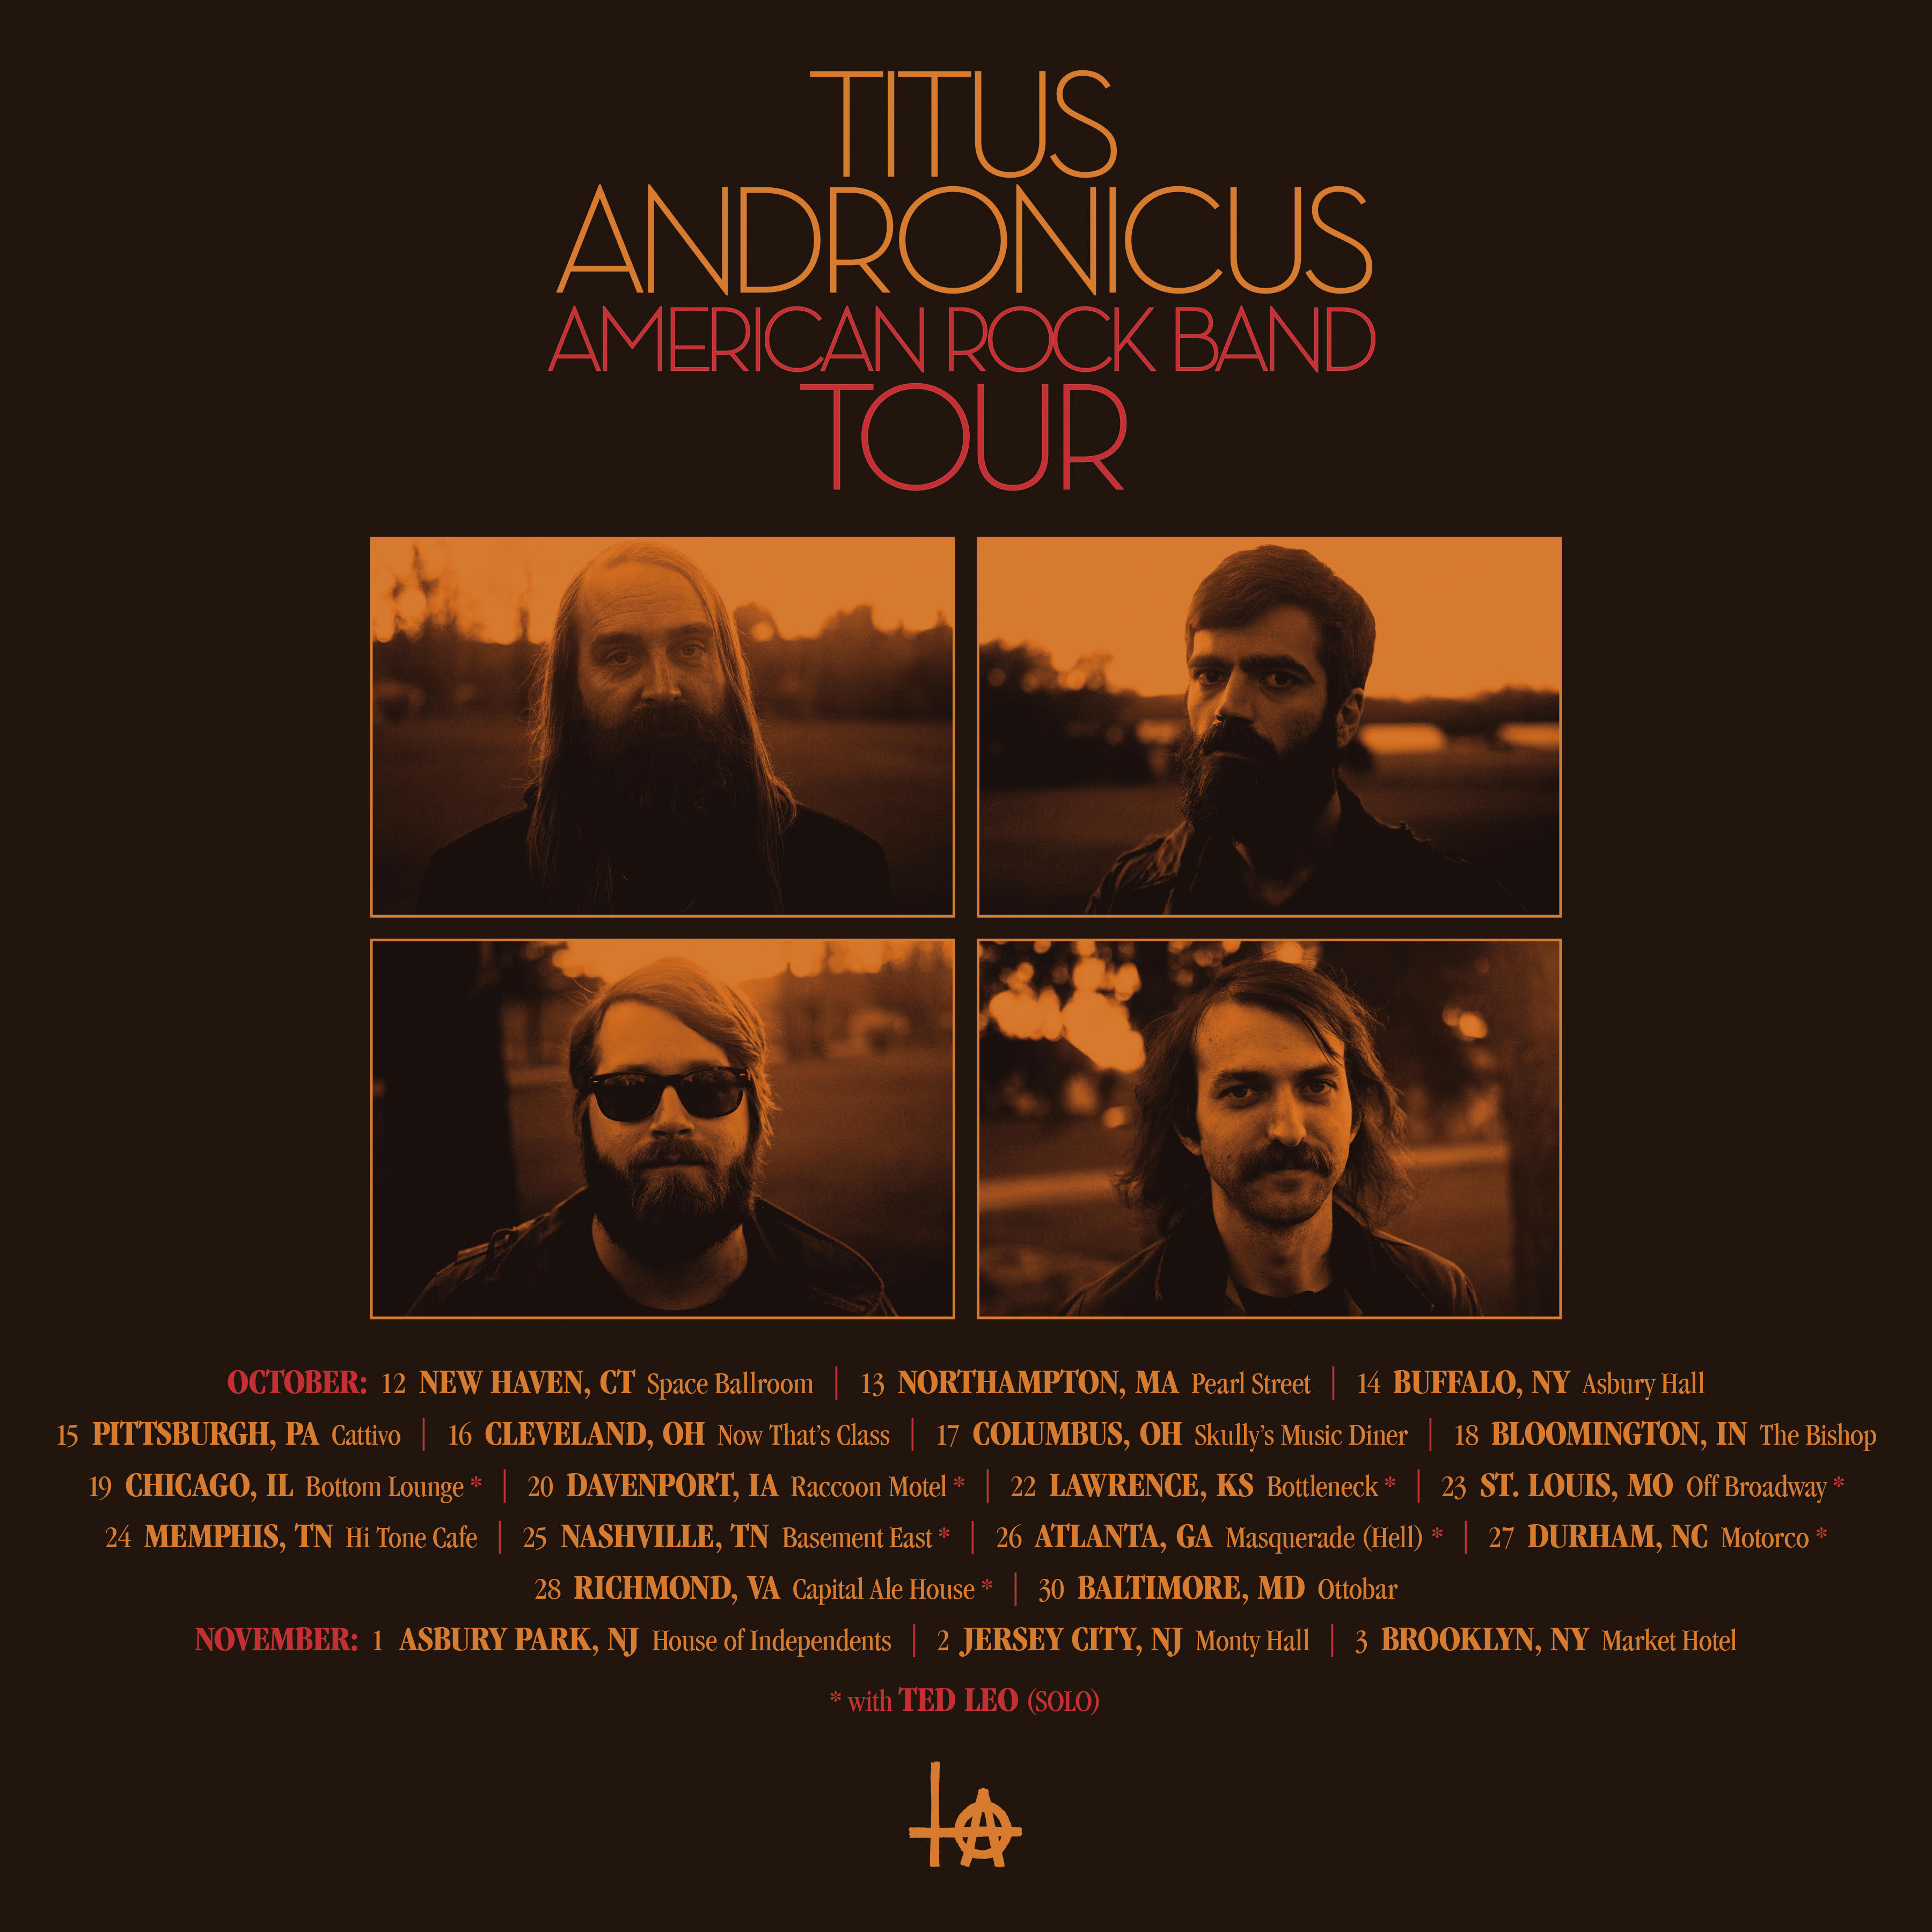 titus-andronicus-AMERICAN-ROCK-BAND-TOUR-dates.jpg